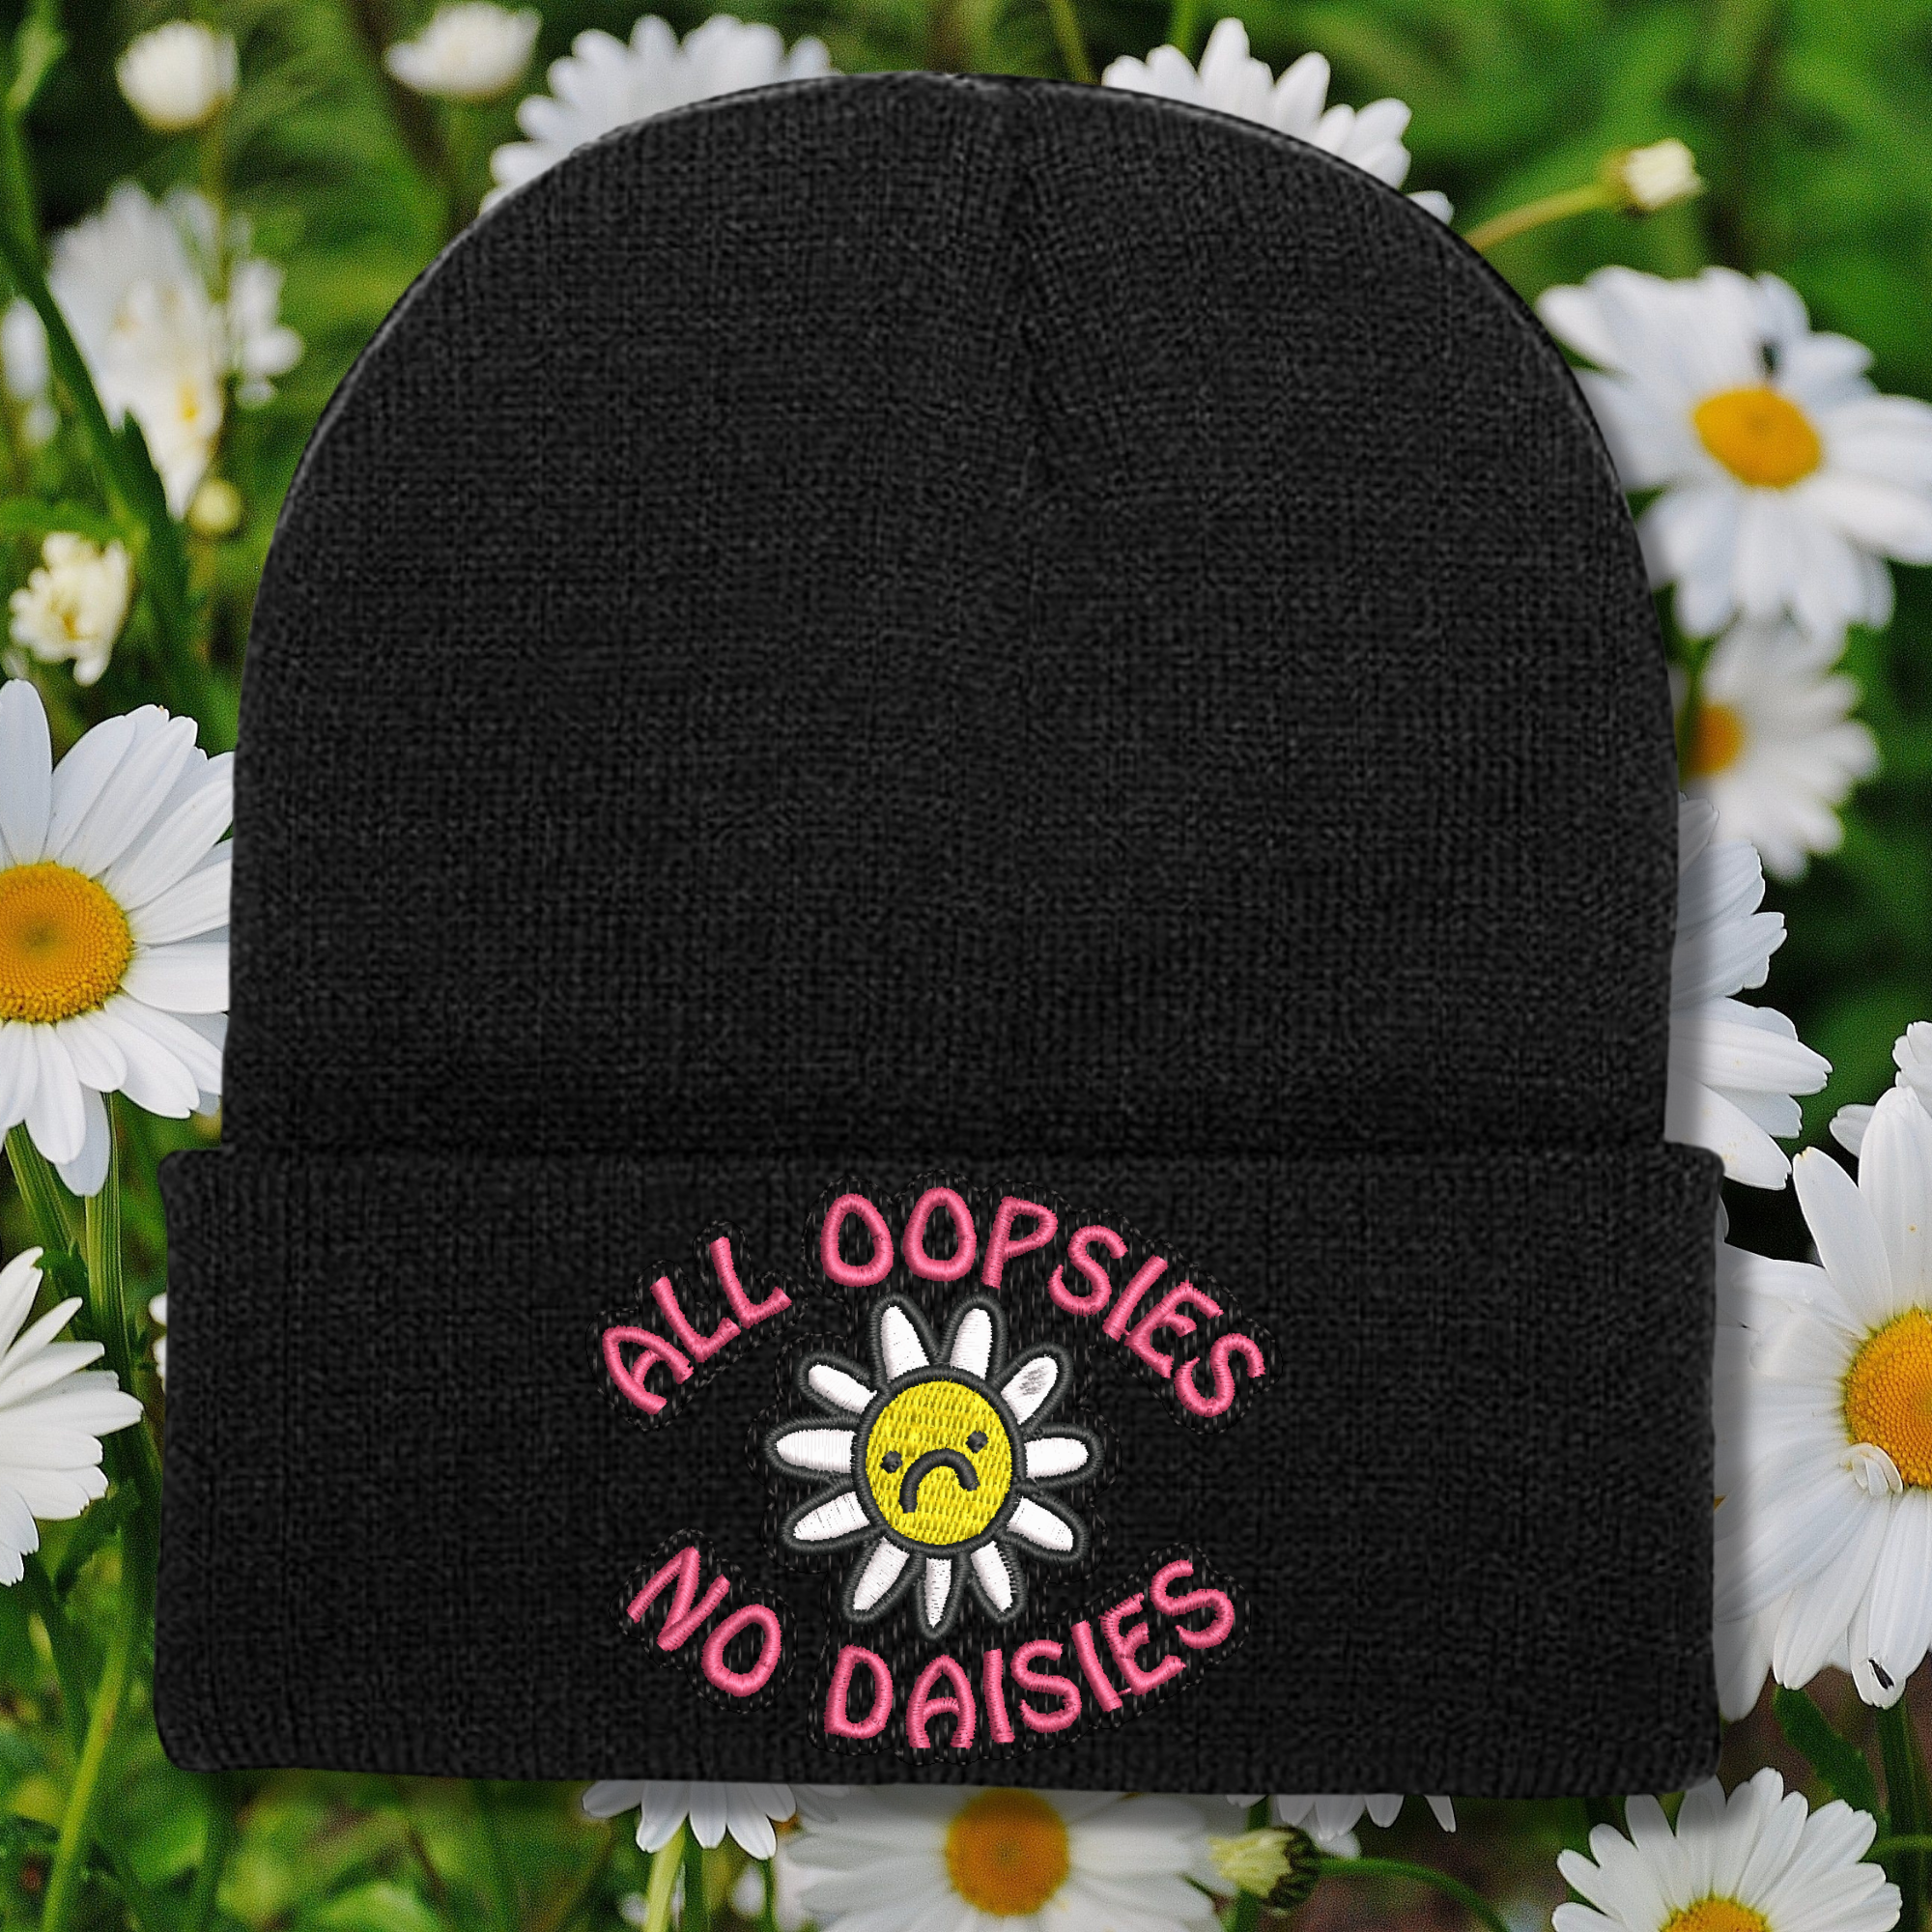 All Oopsies No Daisies Embroidered Beanie Hat, One Size Fits All